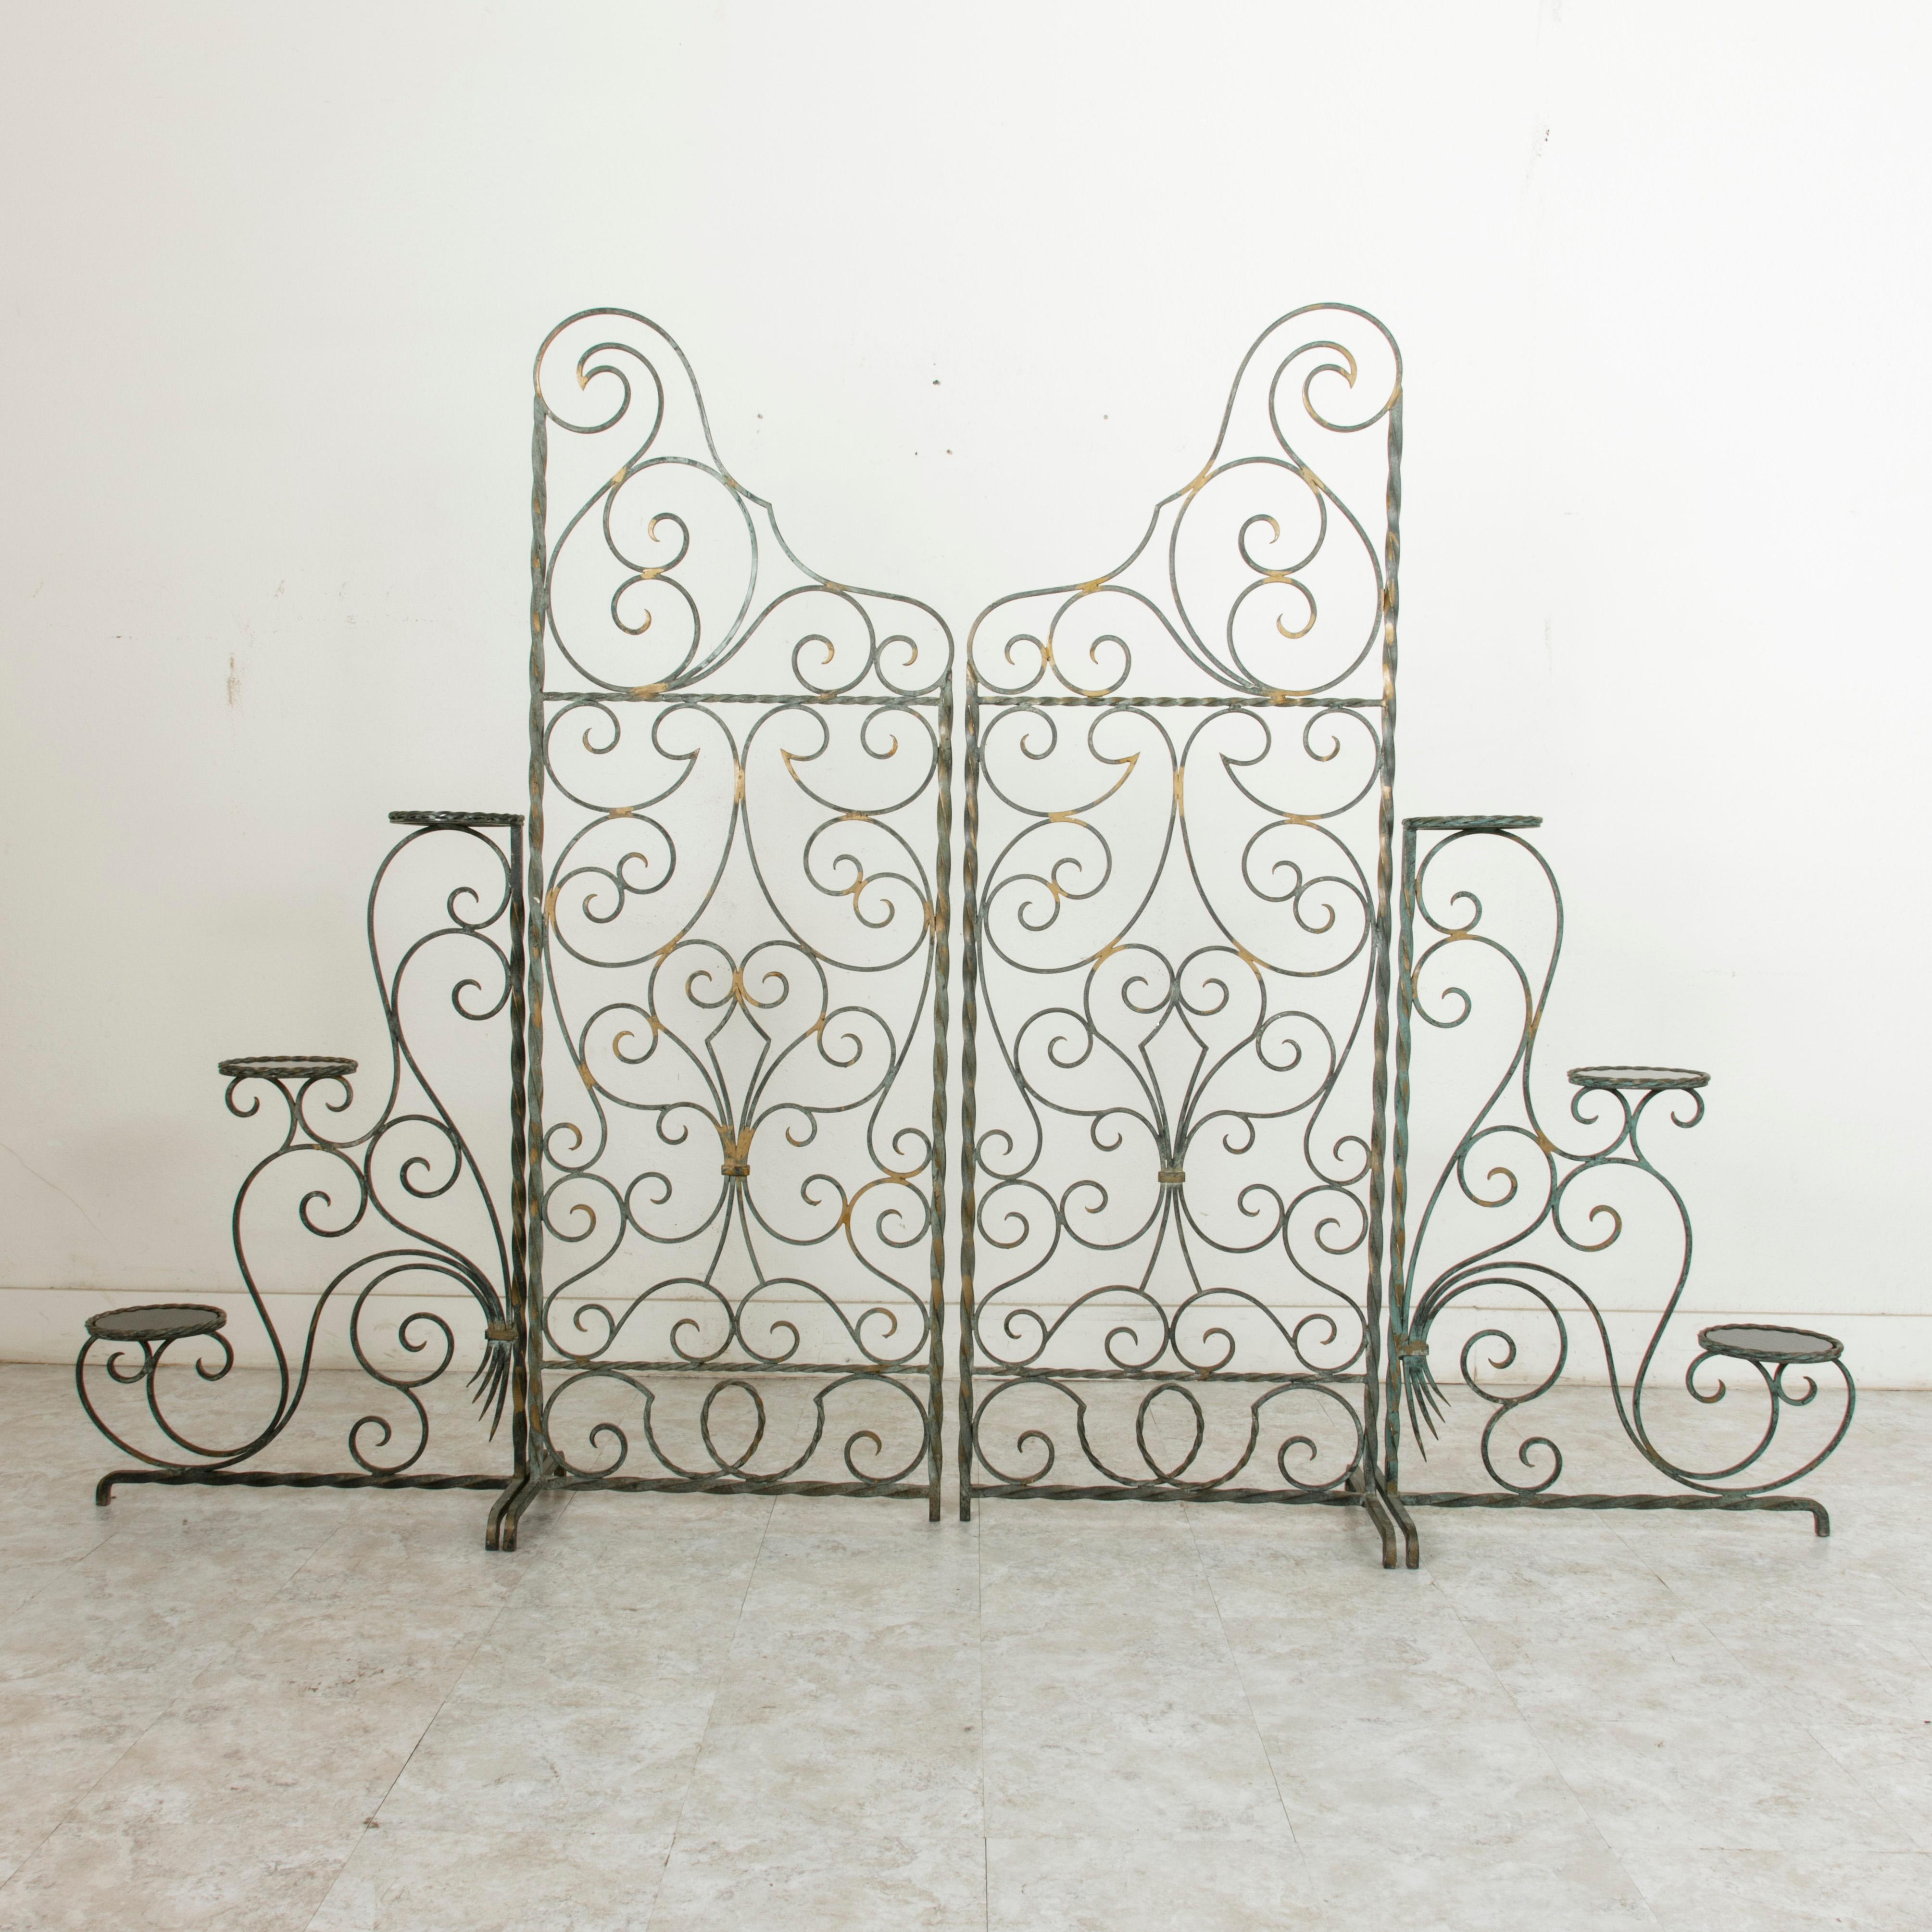 This set of four mid-20th century French wrought iron partitions features intricate scrolling ironwork with a green patina and hand painted gold detailing. The two taller sections each measure 68 inches high by 23.75 inches wide, with supports at